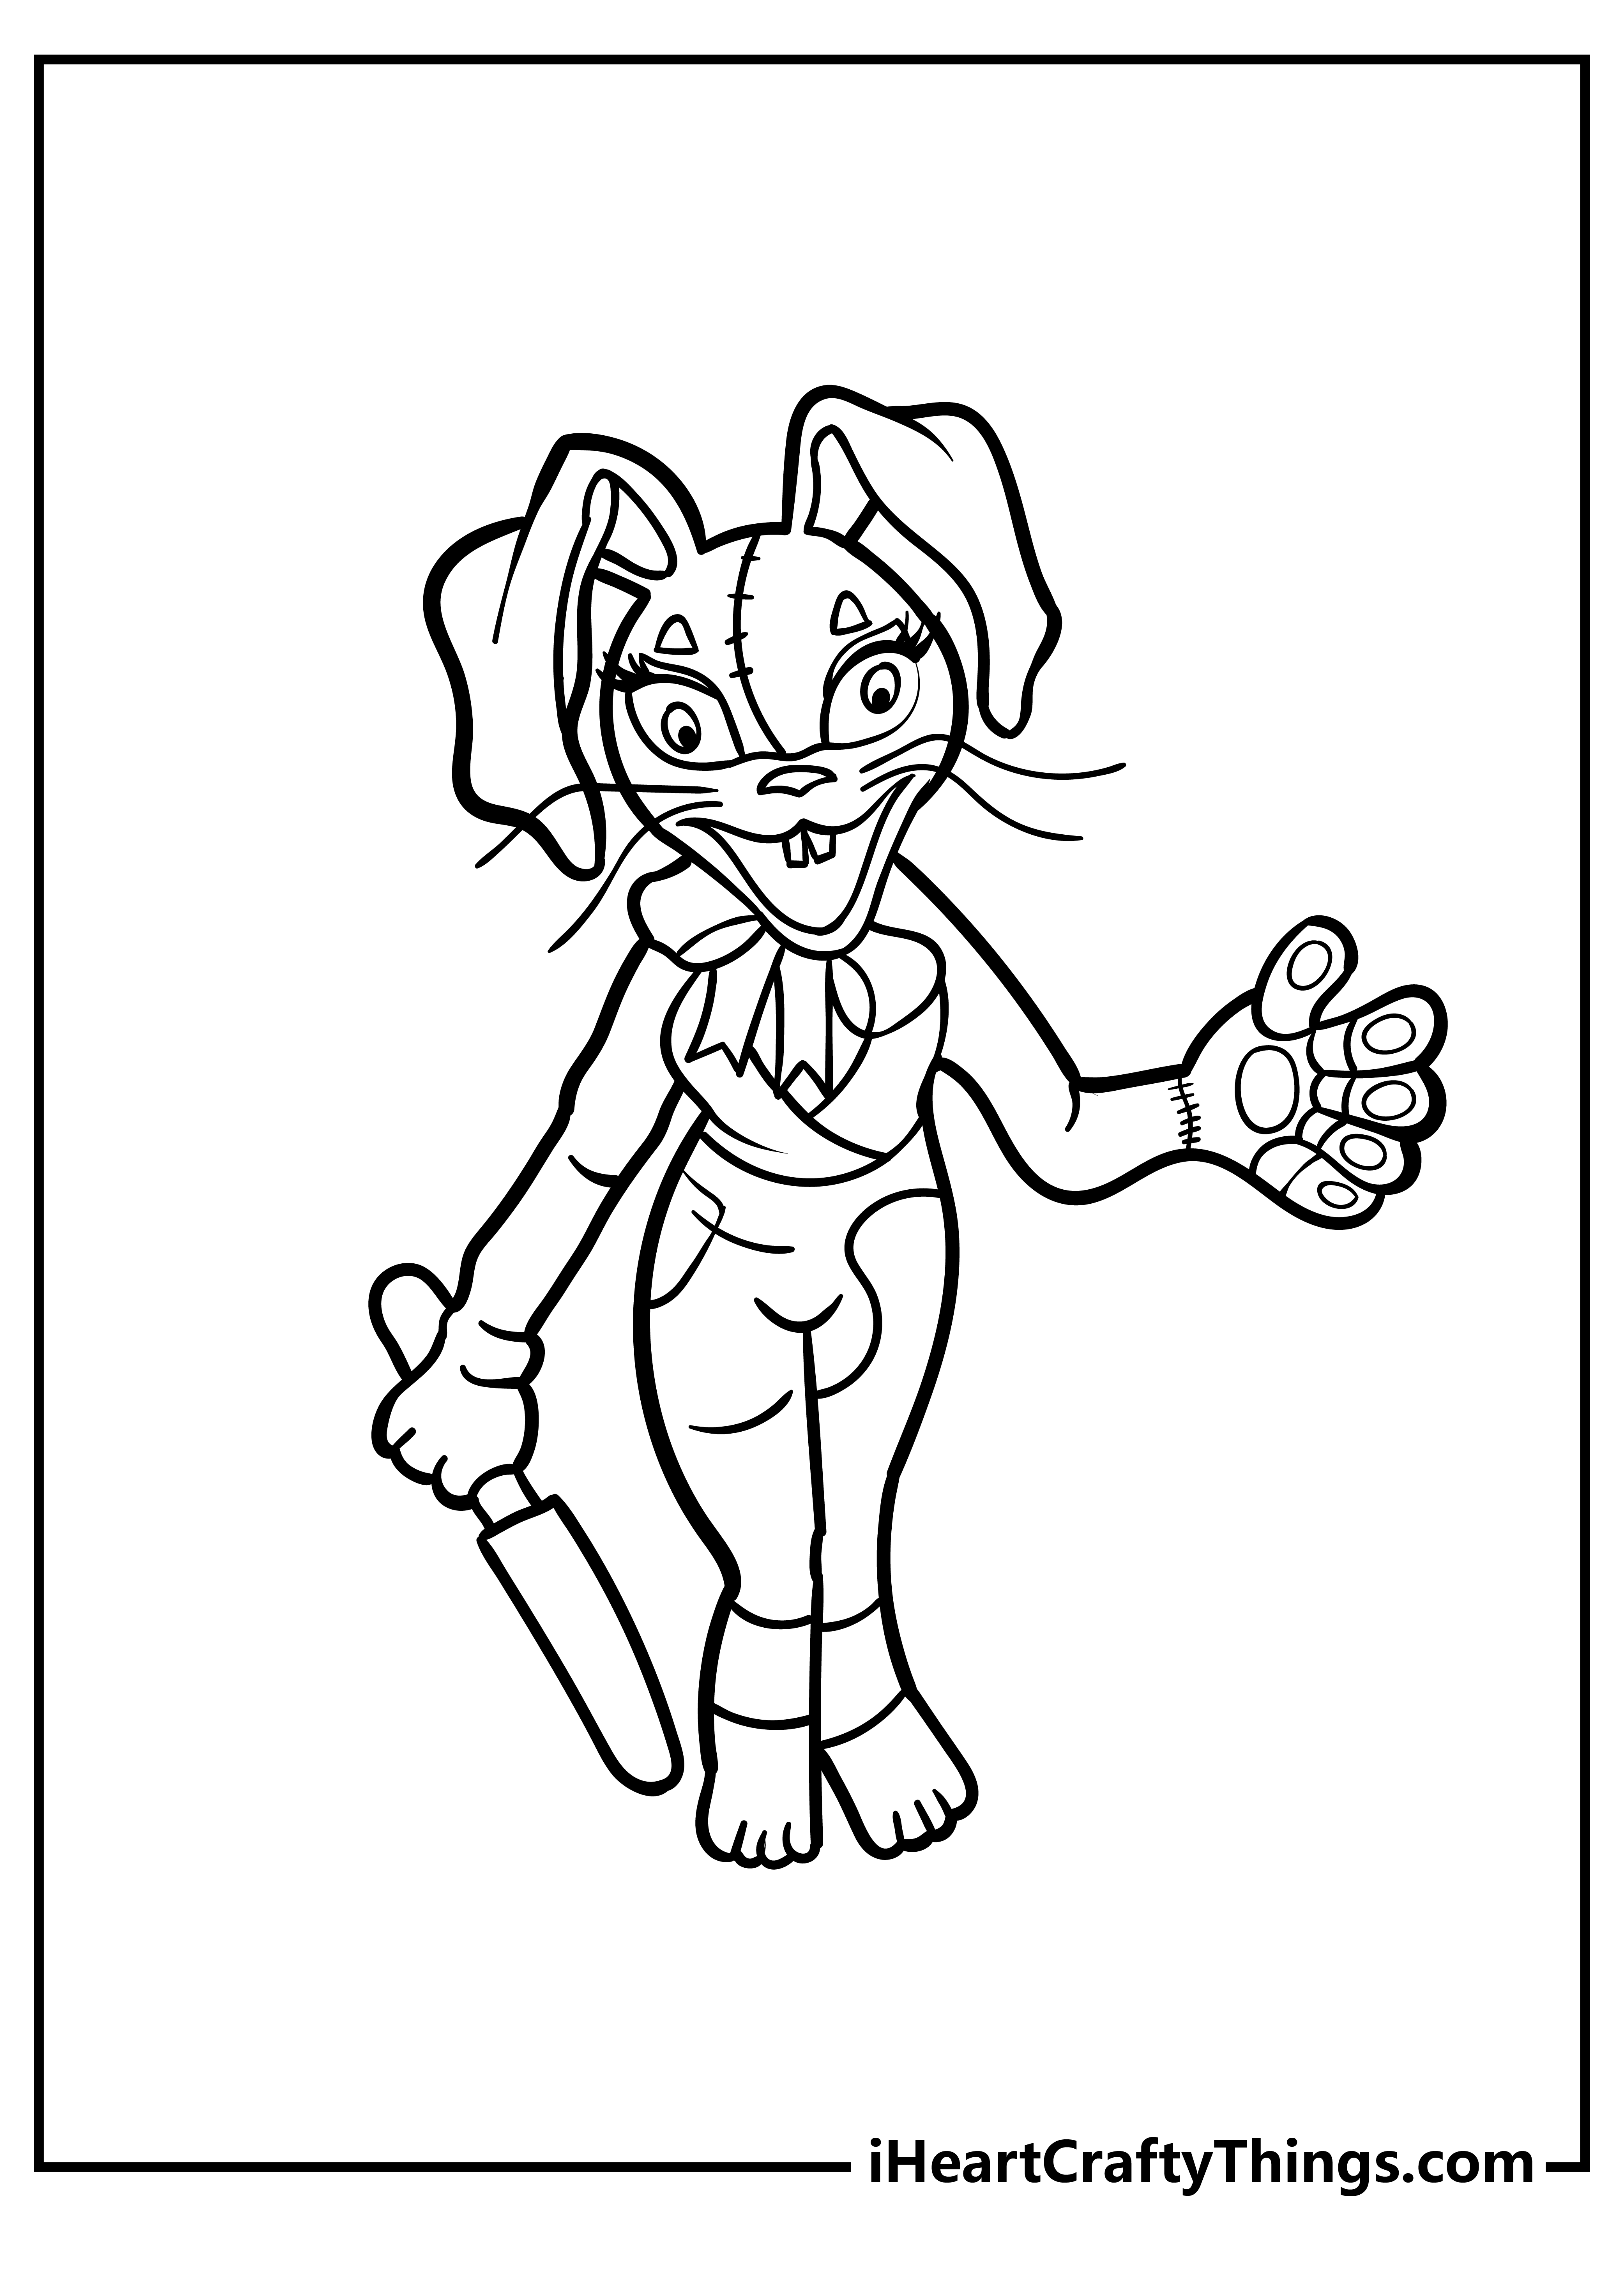 Free Easy To Print Fnaf Coloring Pages Artofit   gn.racesociety.com